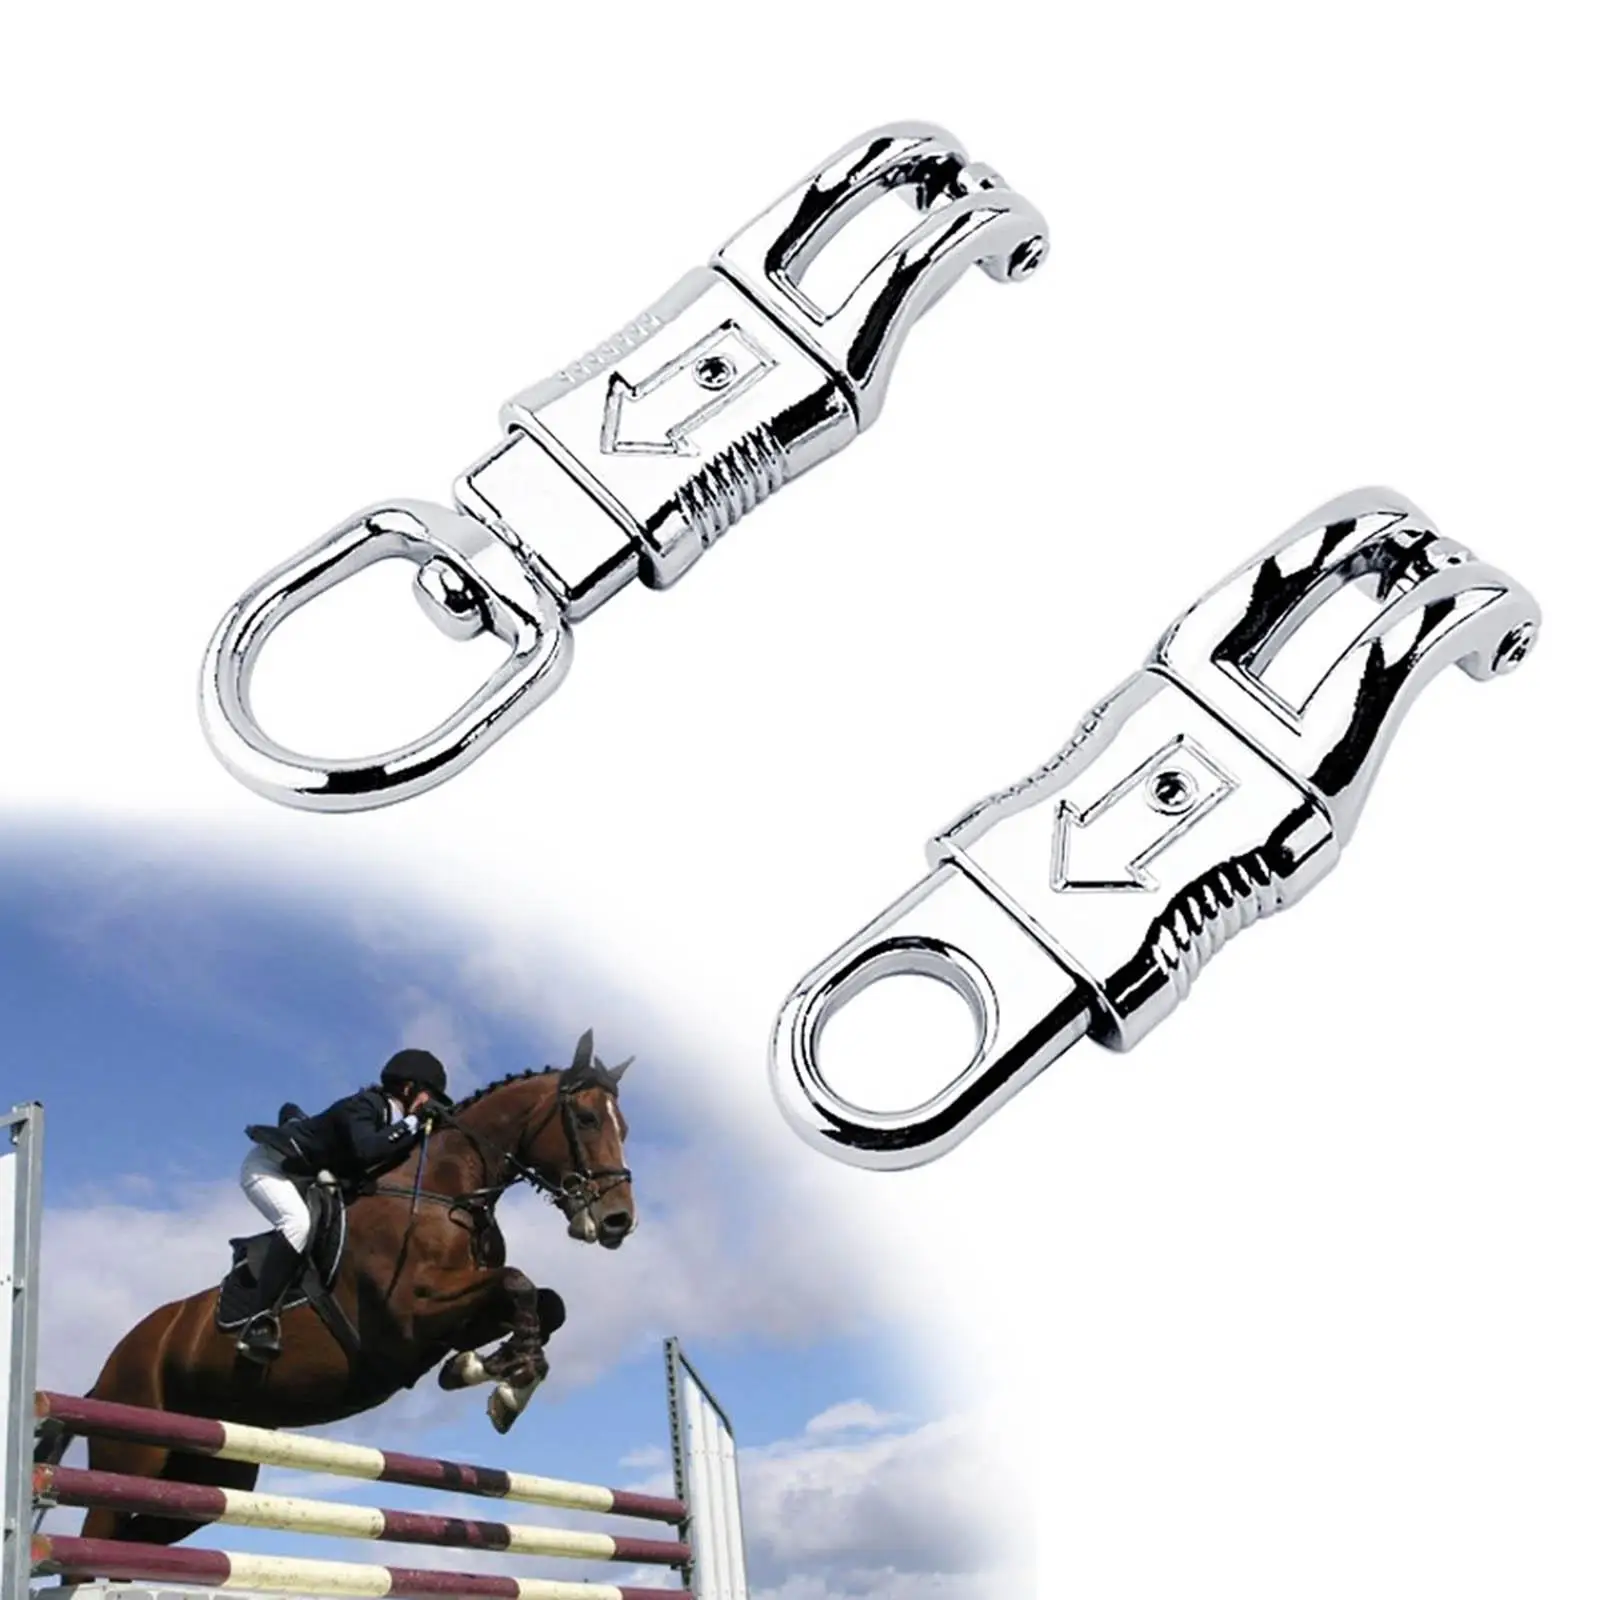 Panic Snap for Paracord Quick Release Heavy Duty Equestrian Leads Reins Hook Clips Buckles for Horse Riding Get Back whips